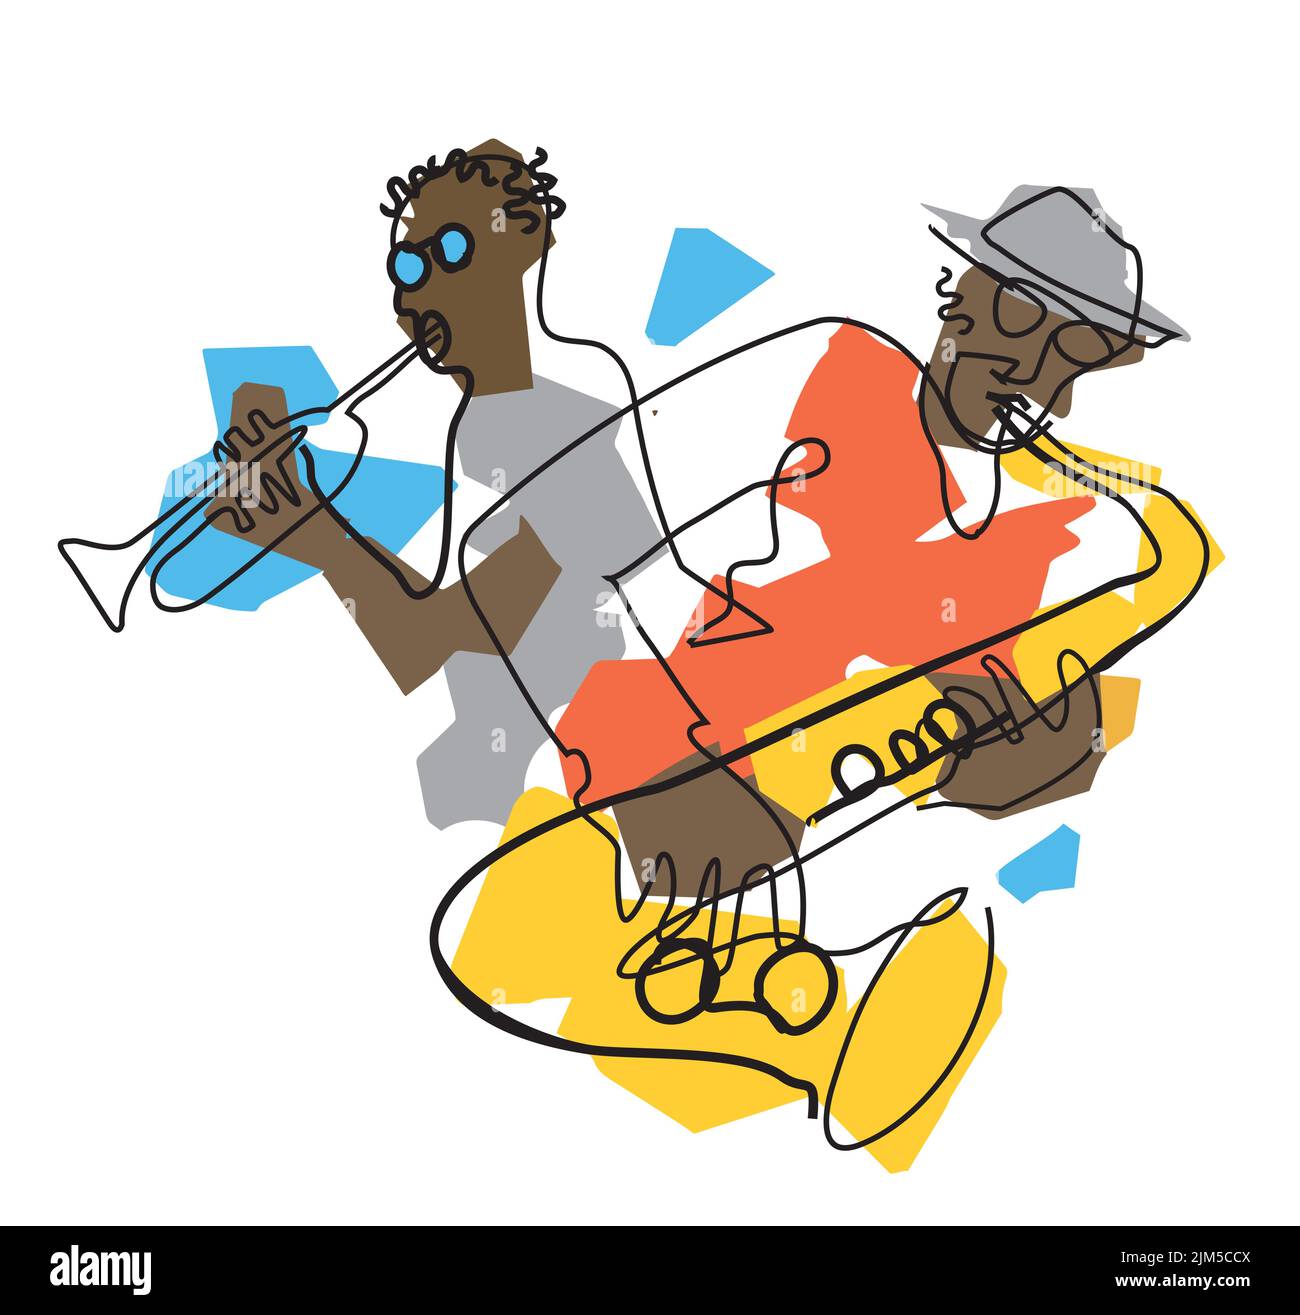 Jazz theme with black men, trumpet player and saxophonist. Expressive Illustration of two jazz musicians, continuous line drawing design. Stock Vector